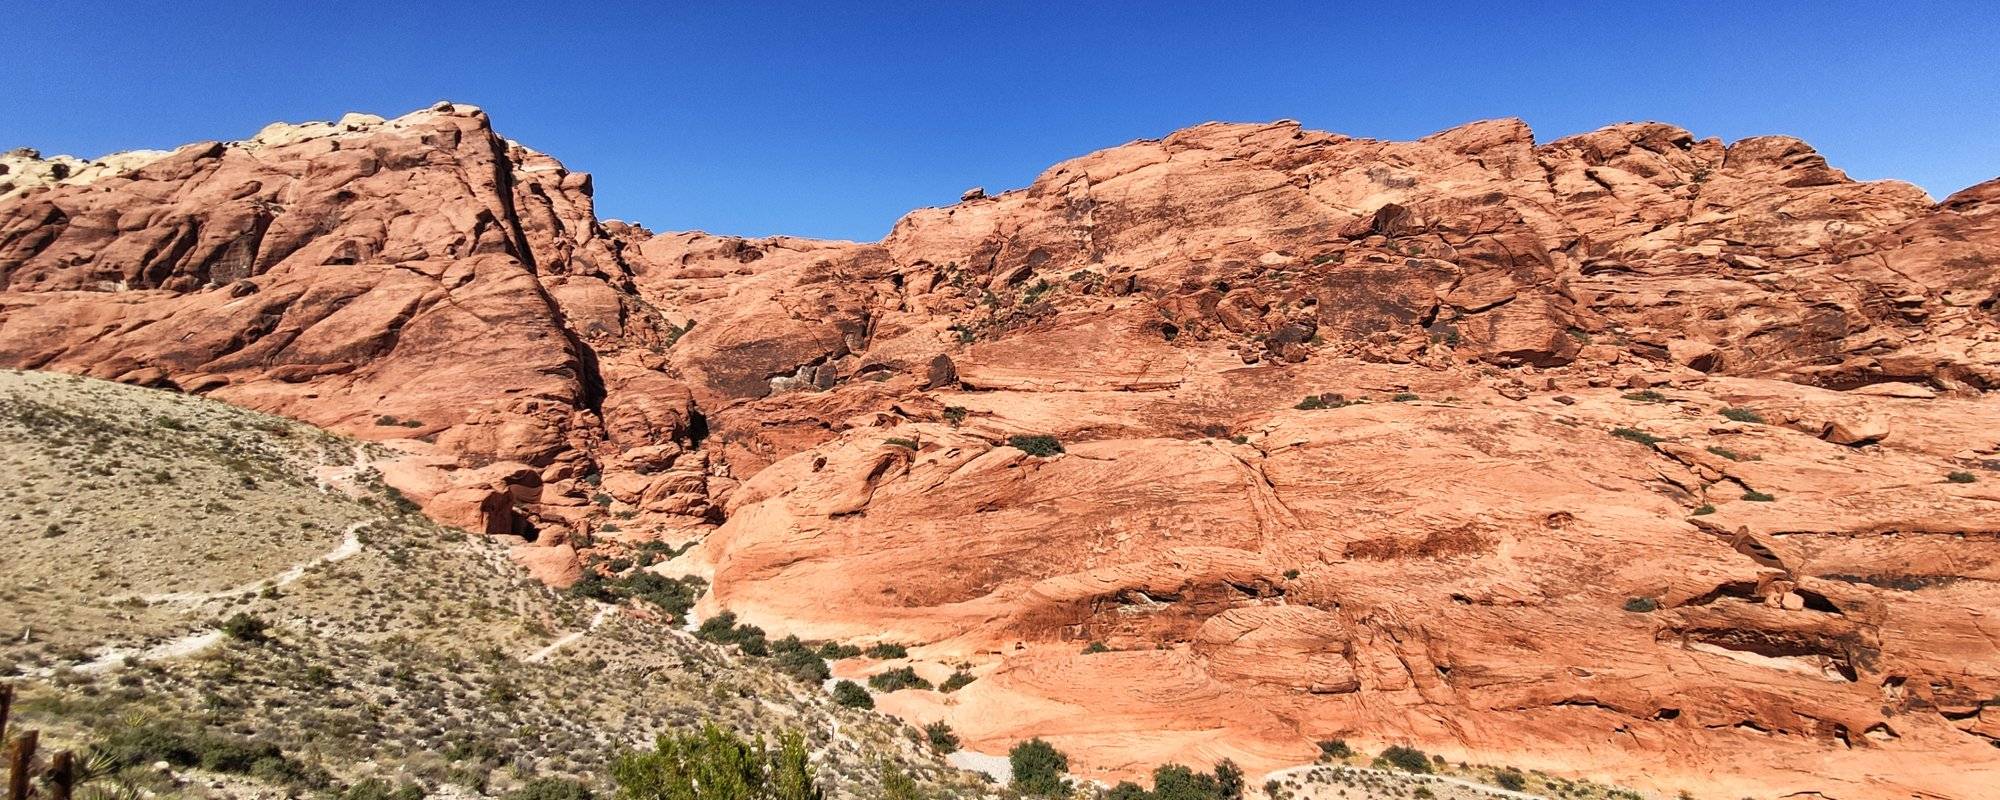 Red Rock Canyon: On a Loop road where once was an ocean